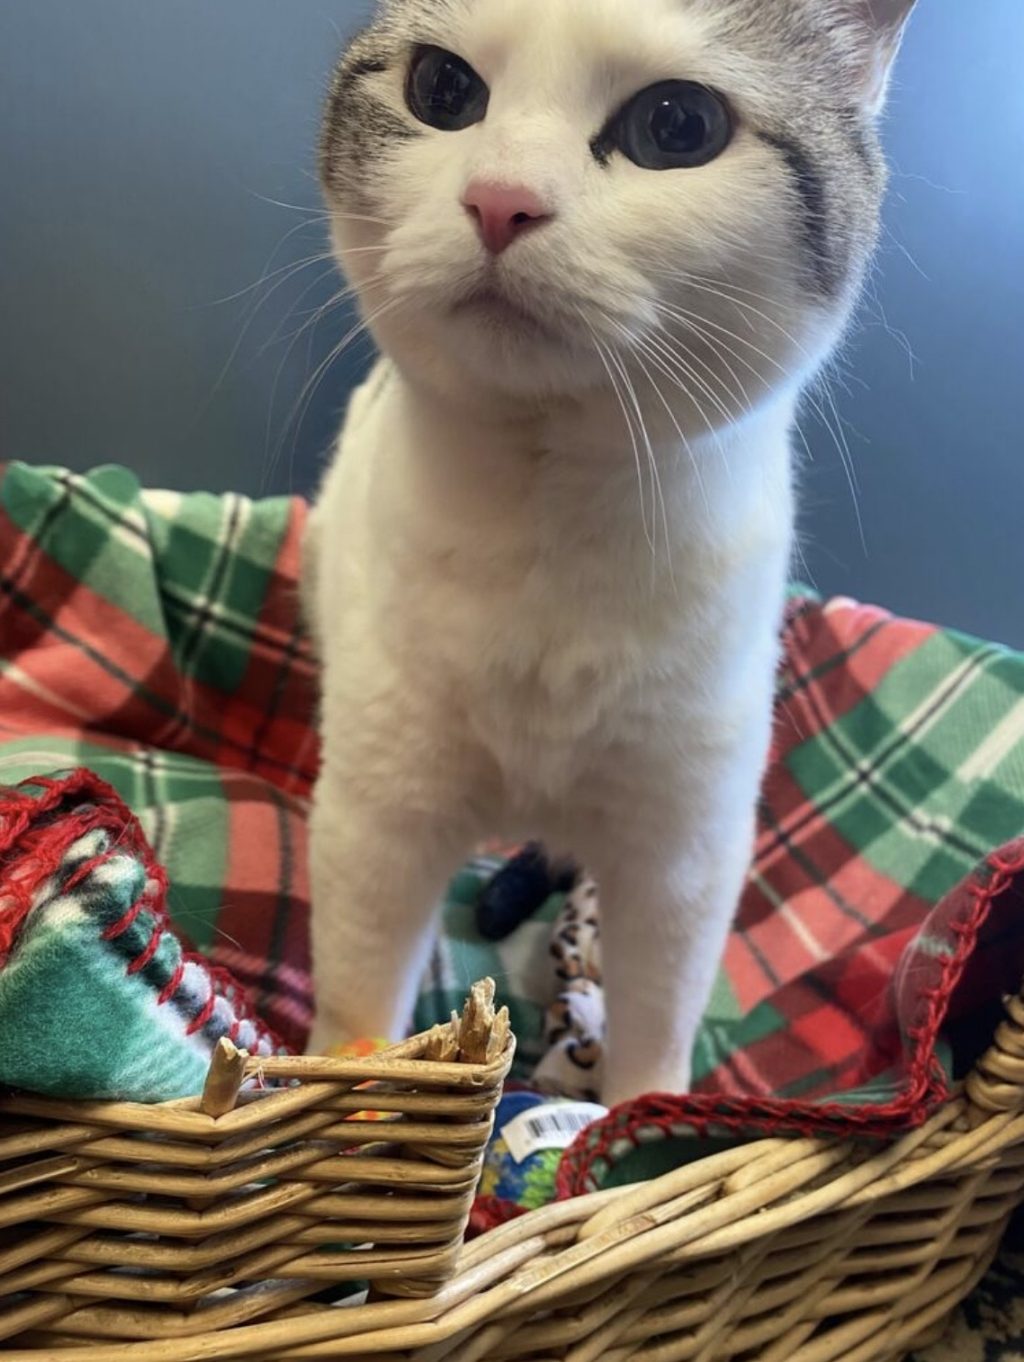 Mama, mother to Minka, has extremely soft fur that she takes excellent care of. She is vocal and loves attention, and isn't afraid to get what she needs. Mama loves to climb up onto your shoulders and lay her head around your neck. Mama is available for adoption, come meet this sweet baby.